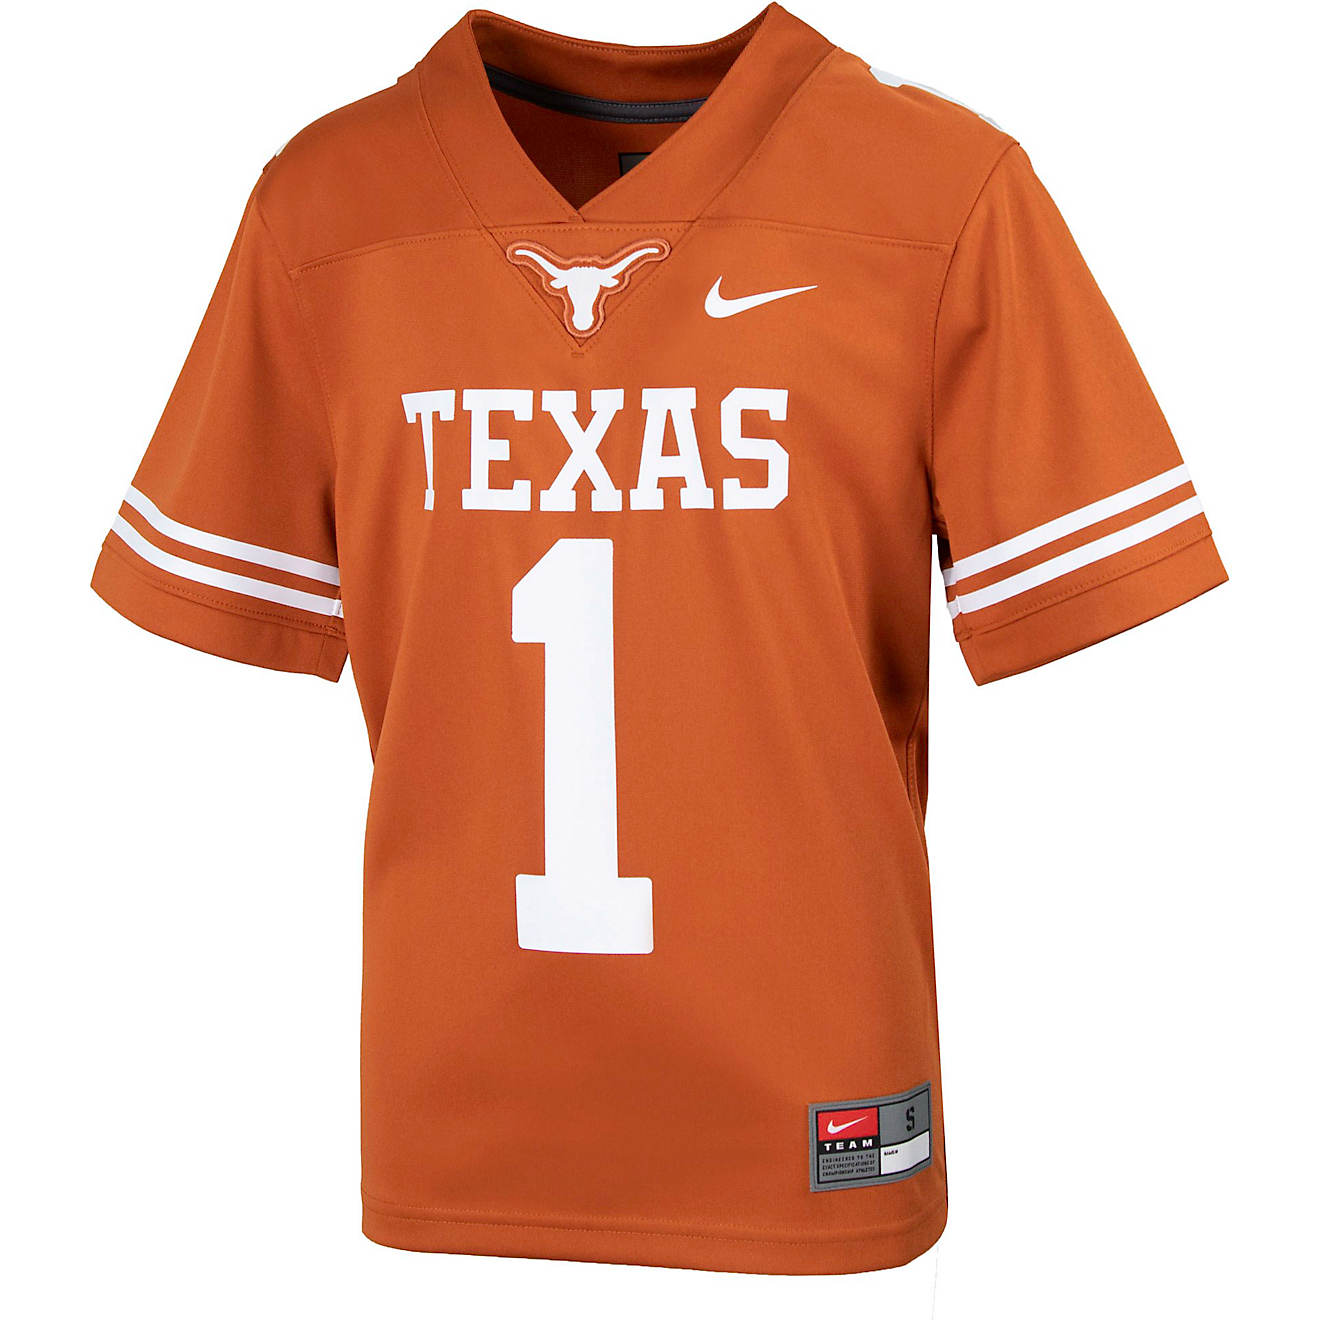 Nike Boys' University of Texas Young Athletes Replica Football Jersey                                                            - view number 1